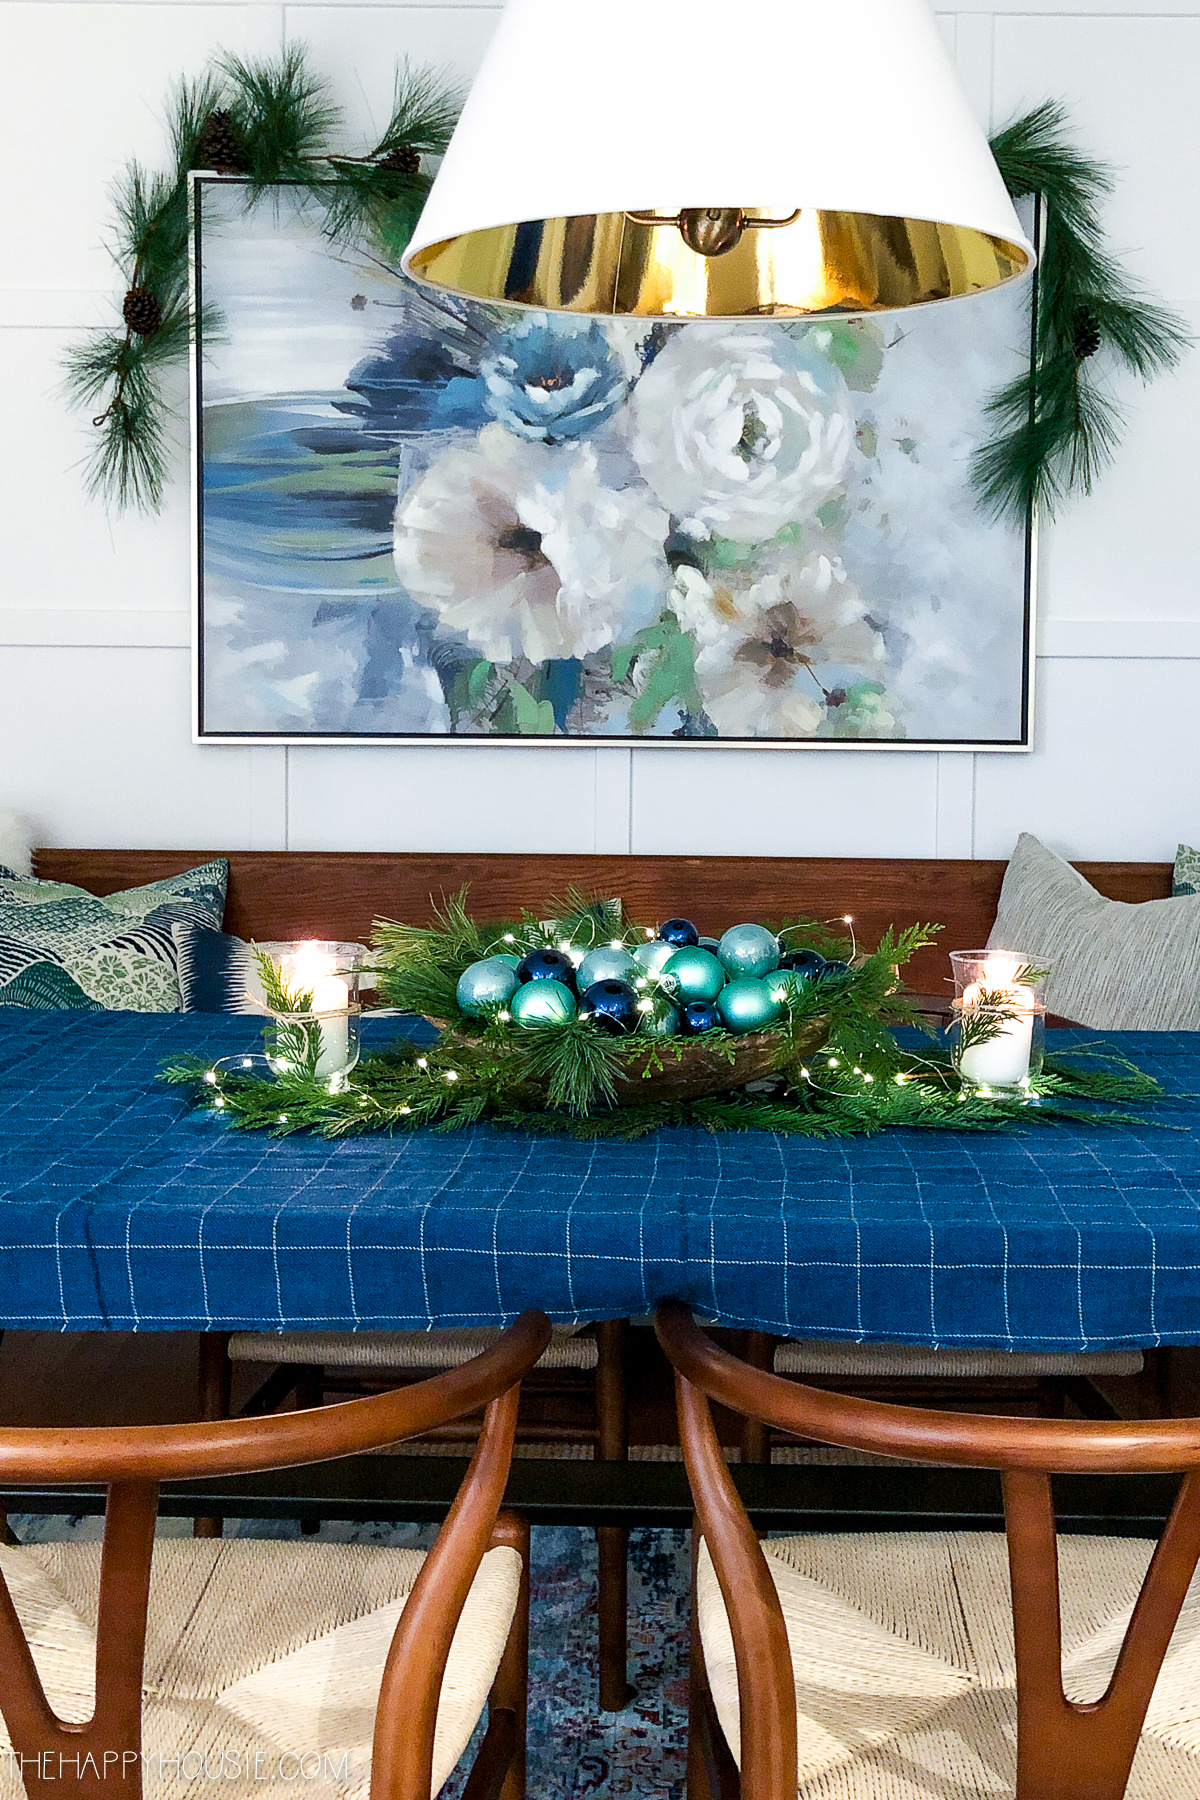 There is a Christmas ornament centrepiece with blue and green ornaments in the middle of the table.